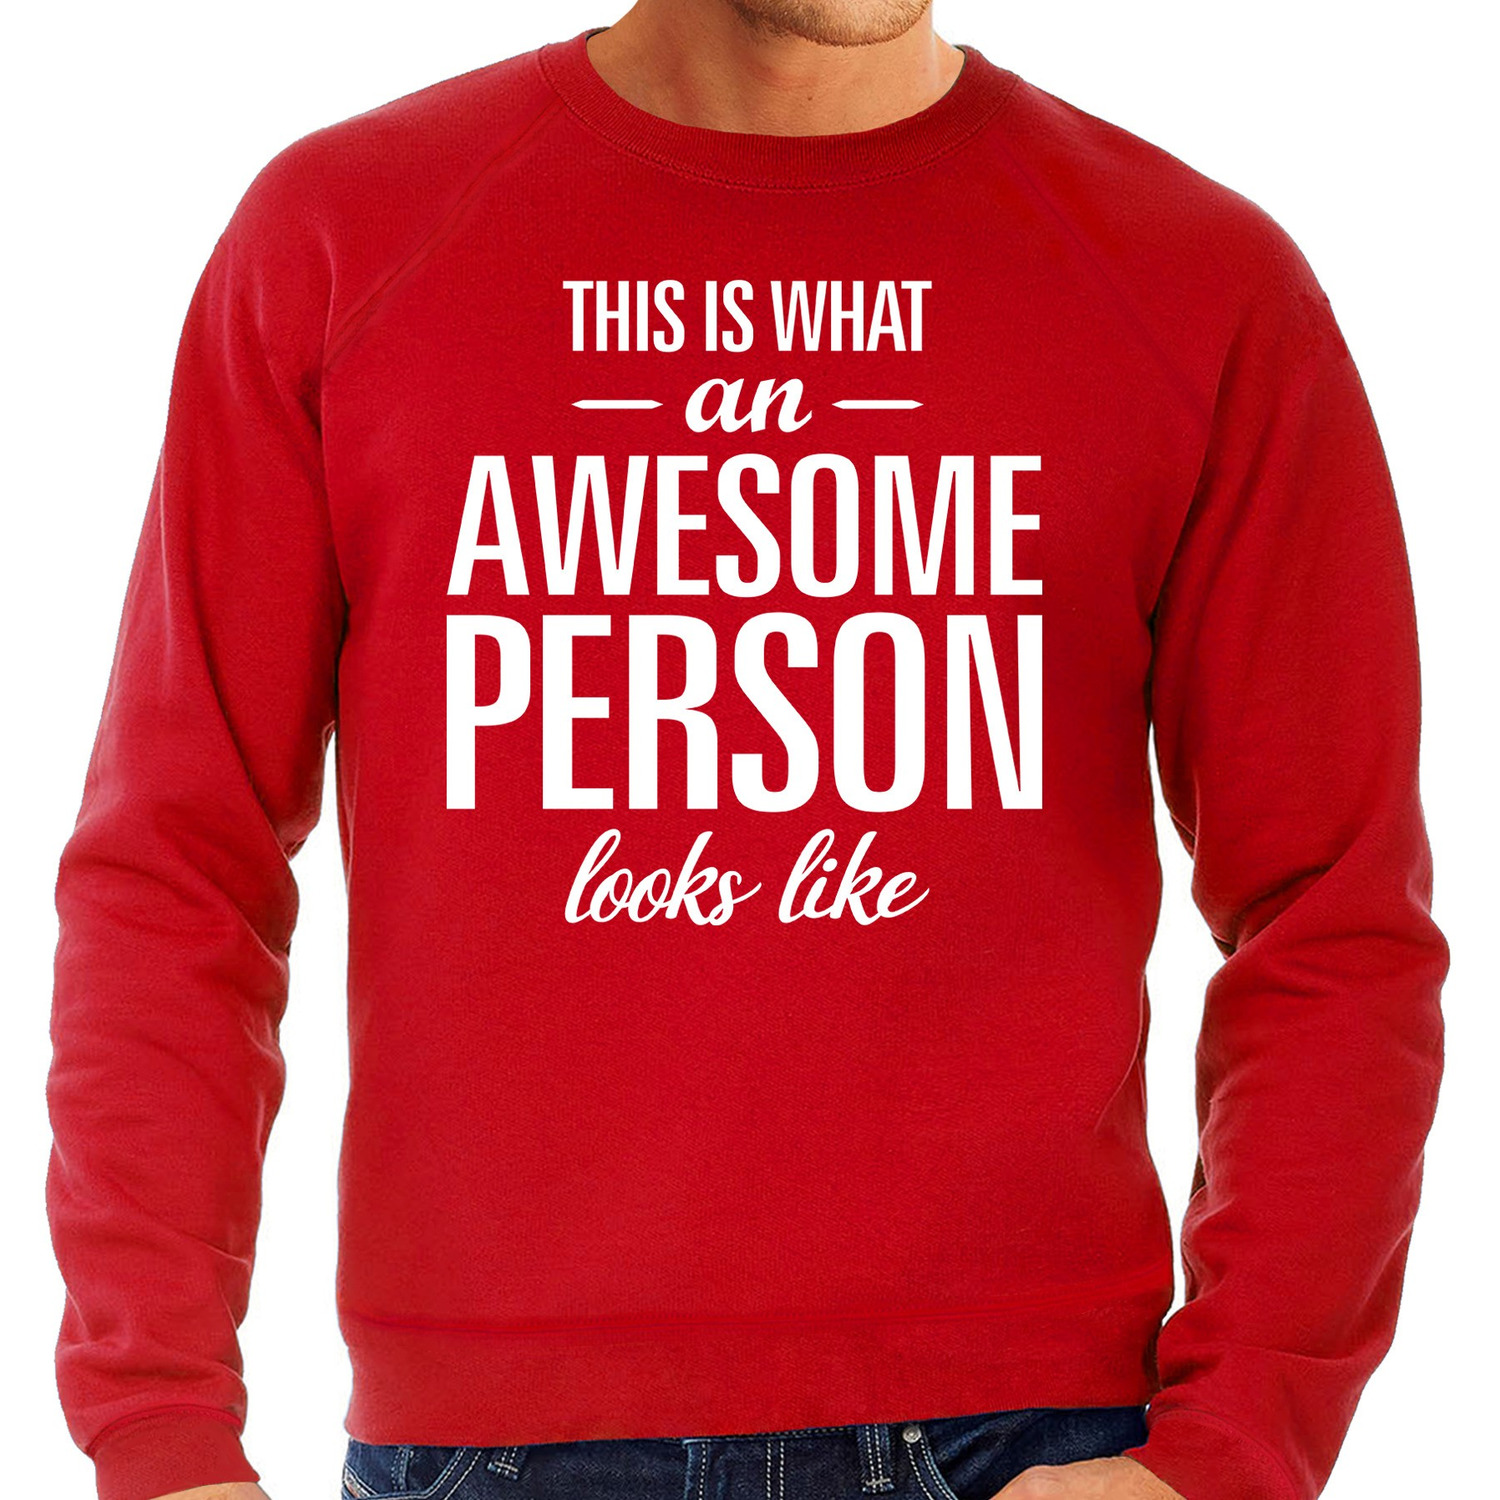 Awesome person / persoon cadeau sweater rood heren